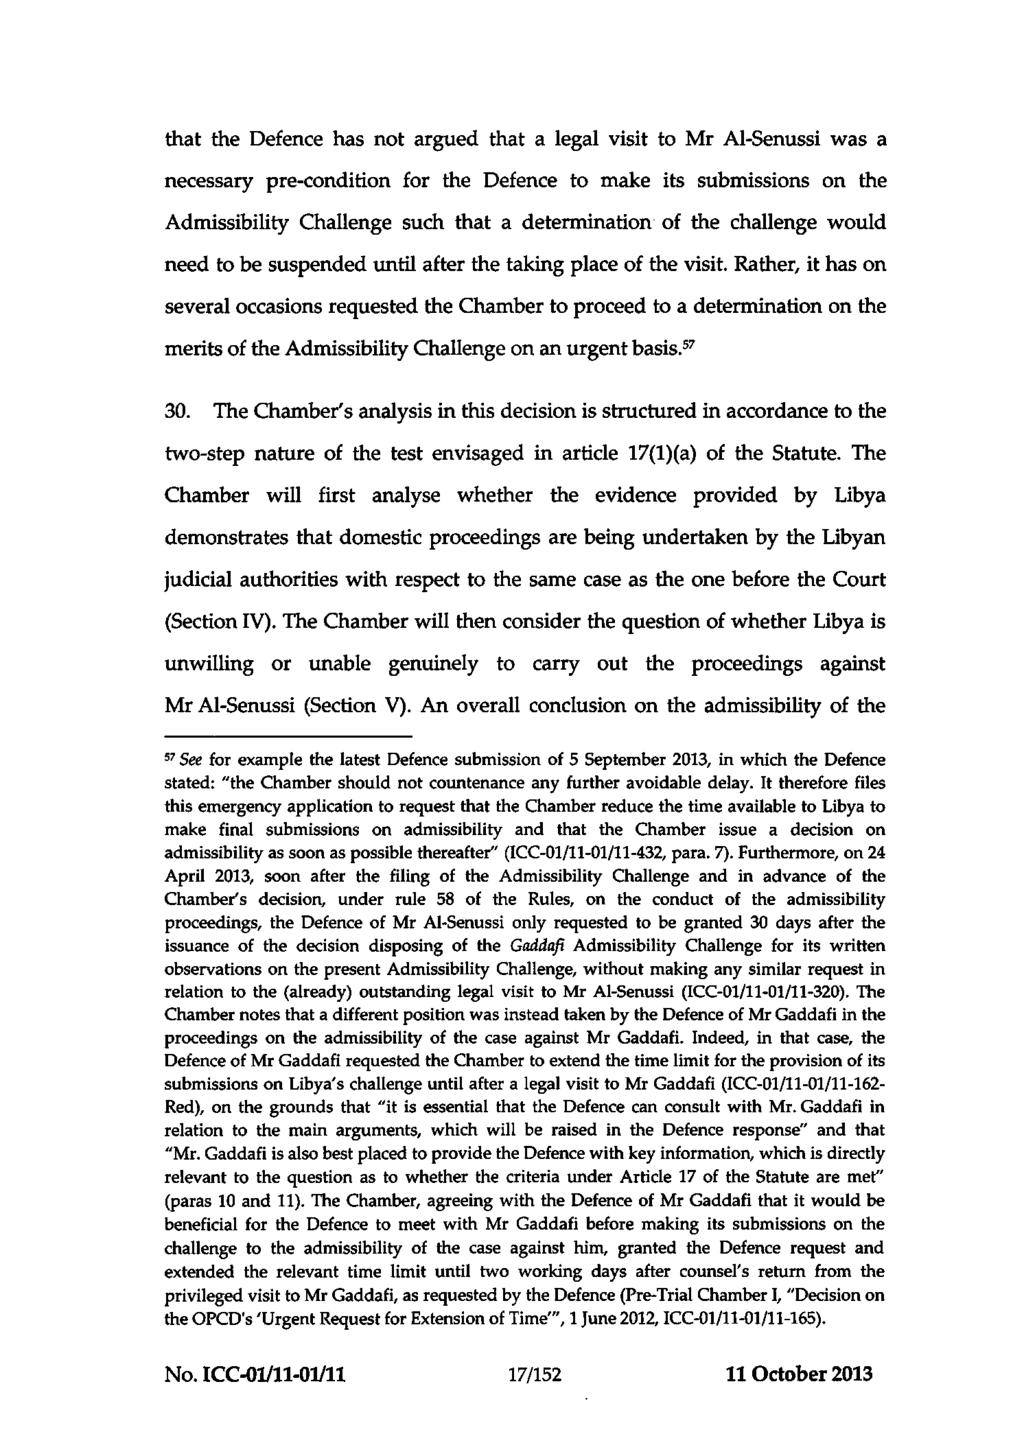 ICC-01/11-01/11-466-Red 11-10-2013 17/152 NM PT that the Defence has not argued that a legal visit to Mr Al-Senussi was a necessary pre-condition for the Defence to make its submissions on the